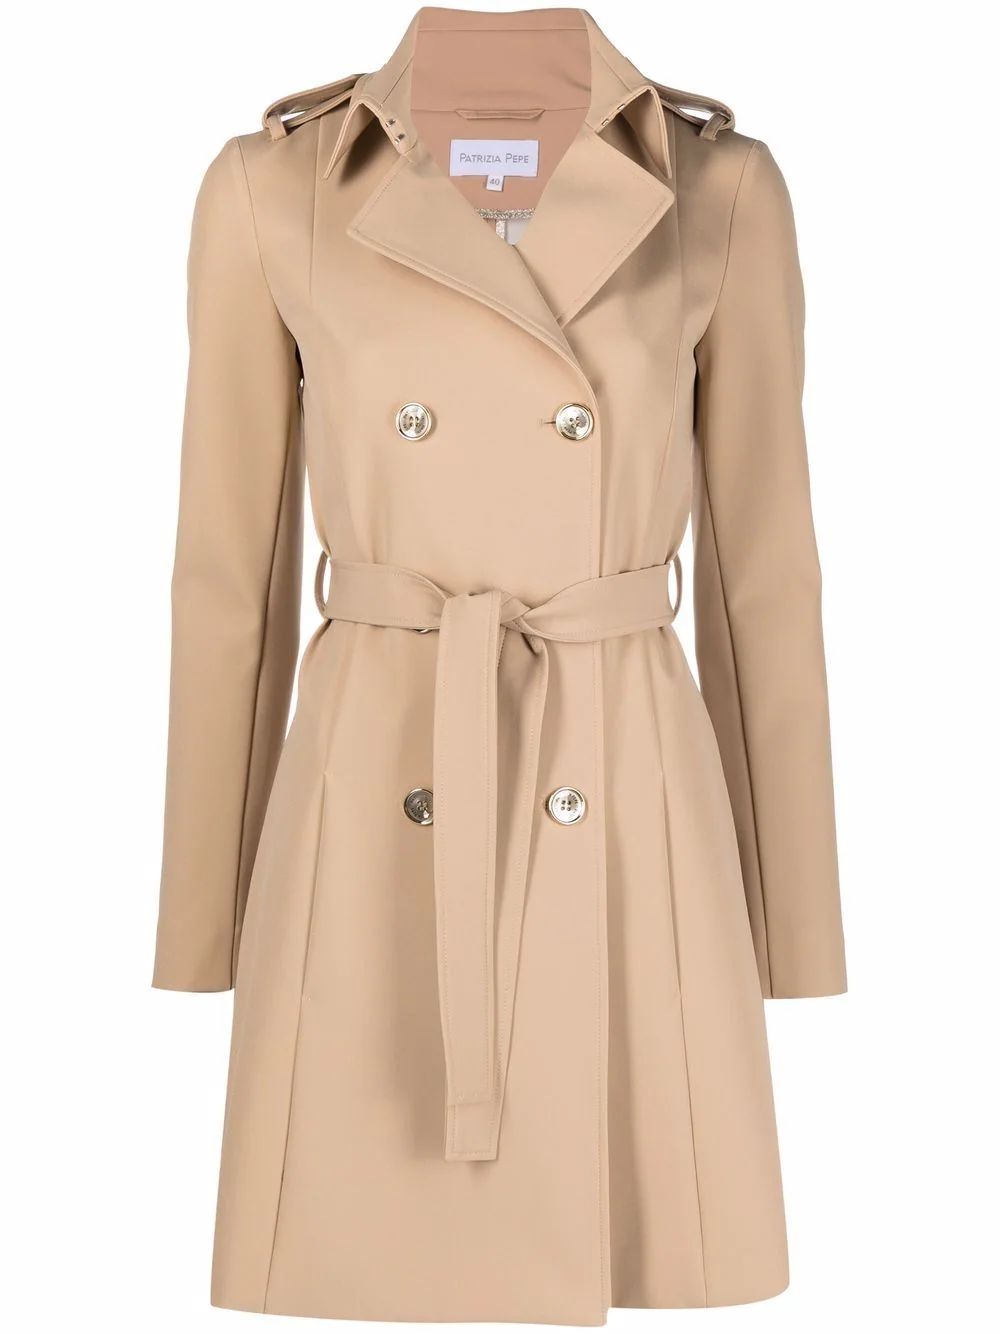 Patrizia Pepe double-breasted Belted Trench Coat - Farfetch | Farfetch Global